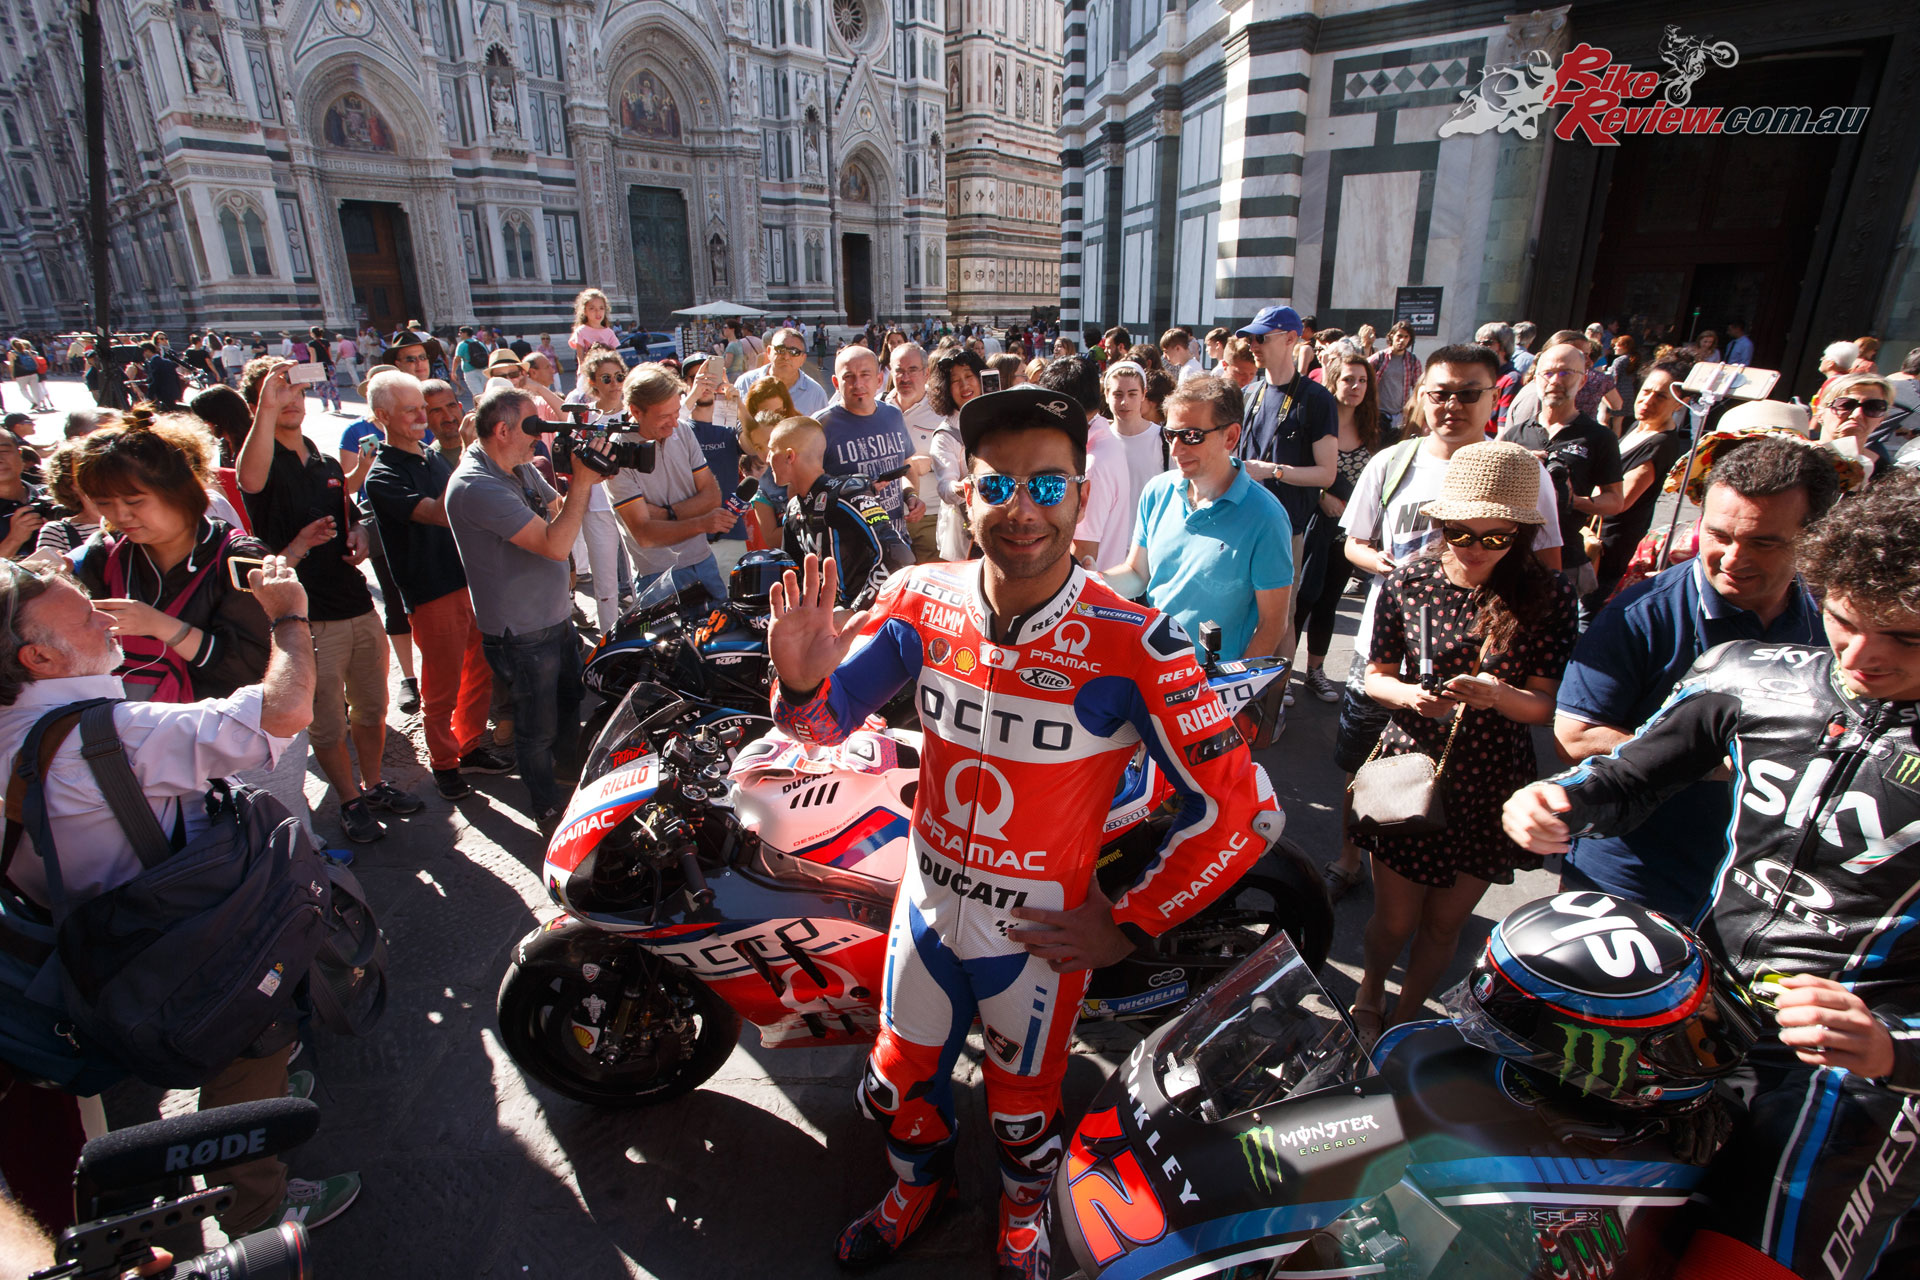 Local hero Danilo Petrucci surrounded by tourists and fans right by the iconic Firenze Duomo